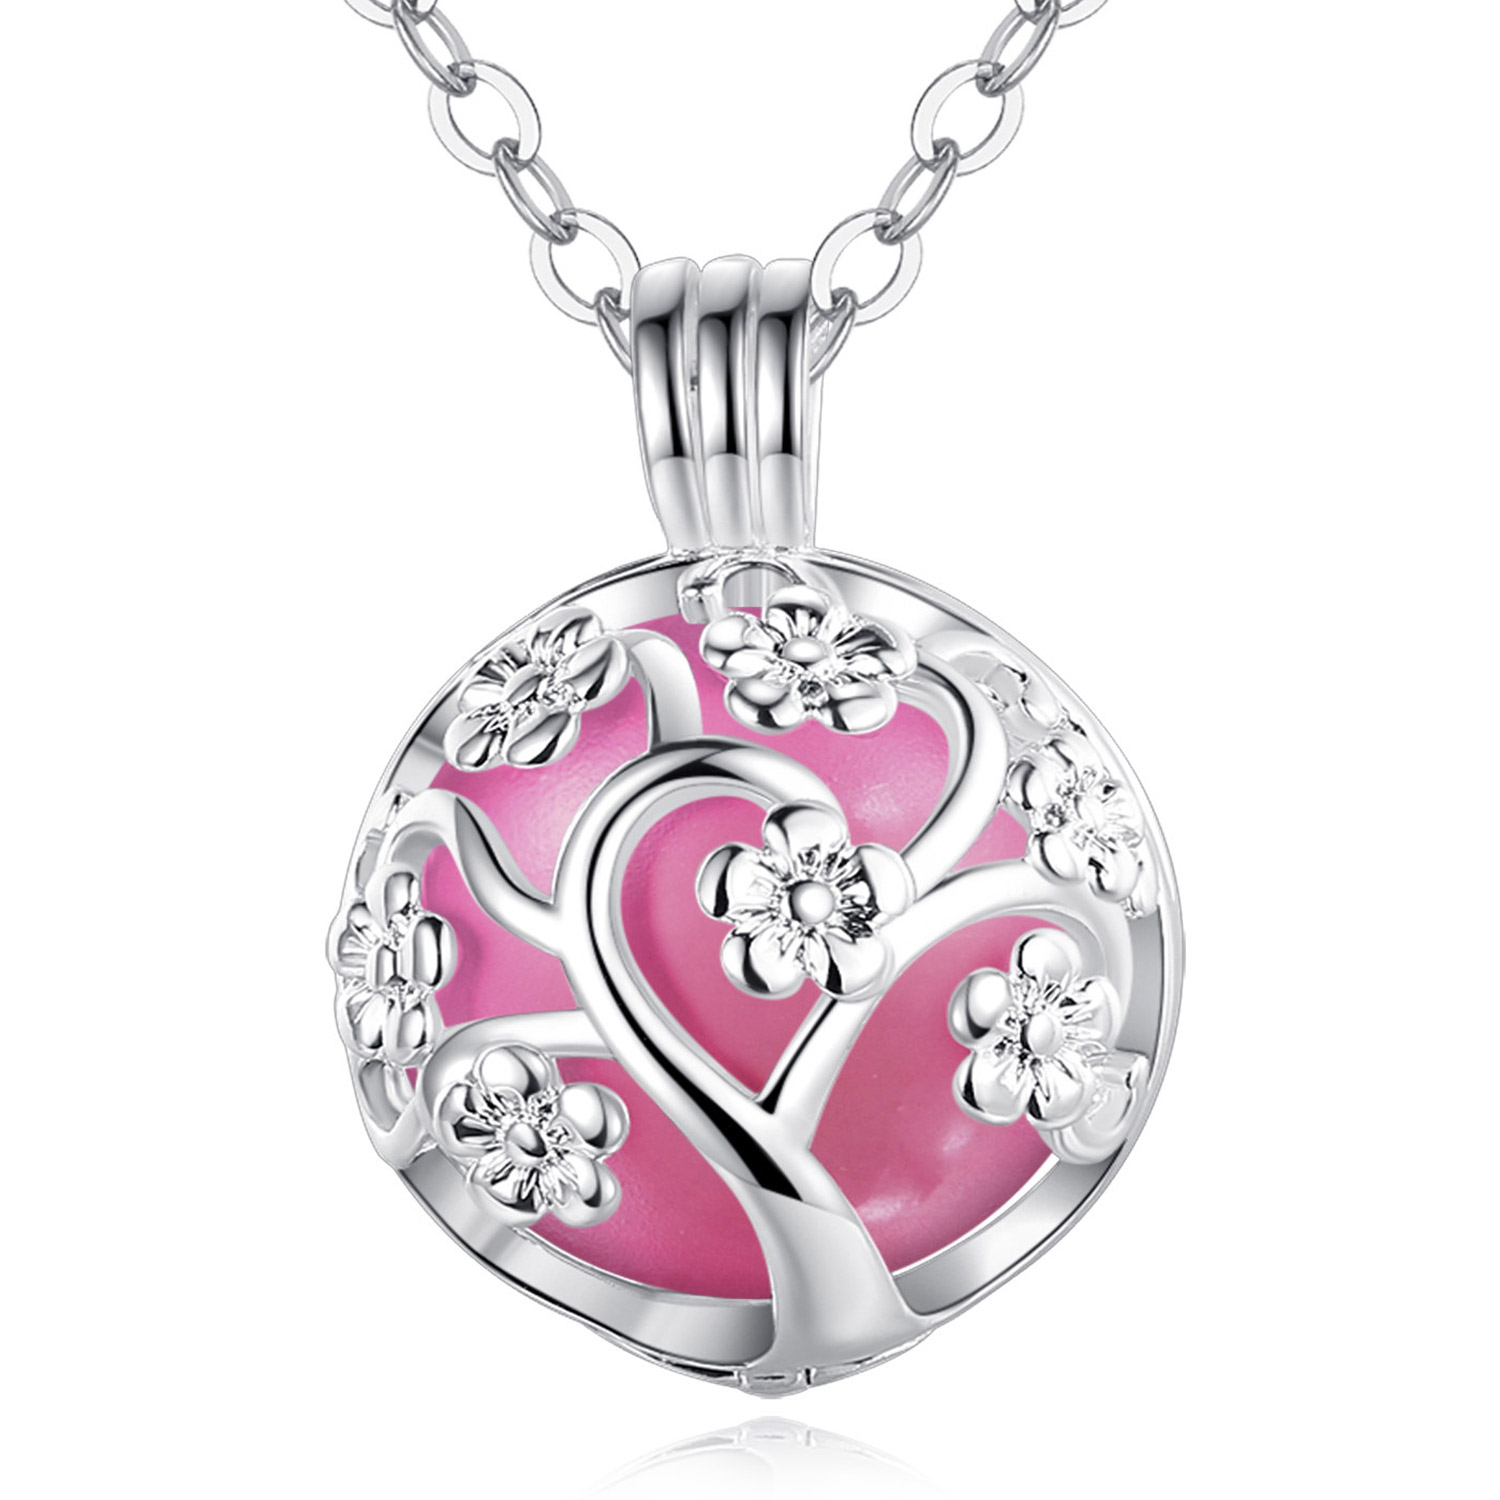 Merryshine Jewelry Flower S925 Sterling Silver Cage Angel Caller Harmony Bola Ball Necklace